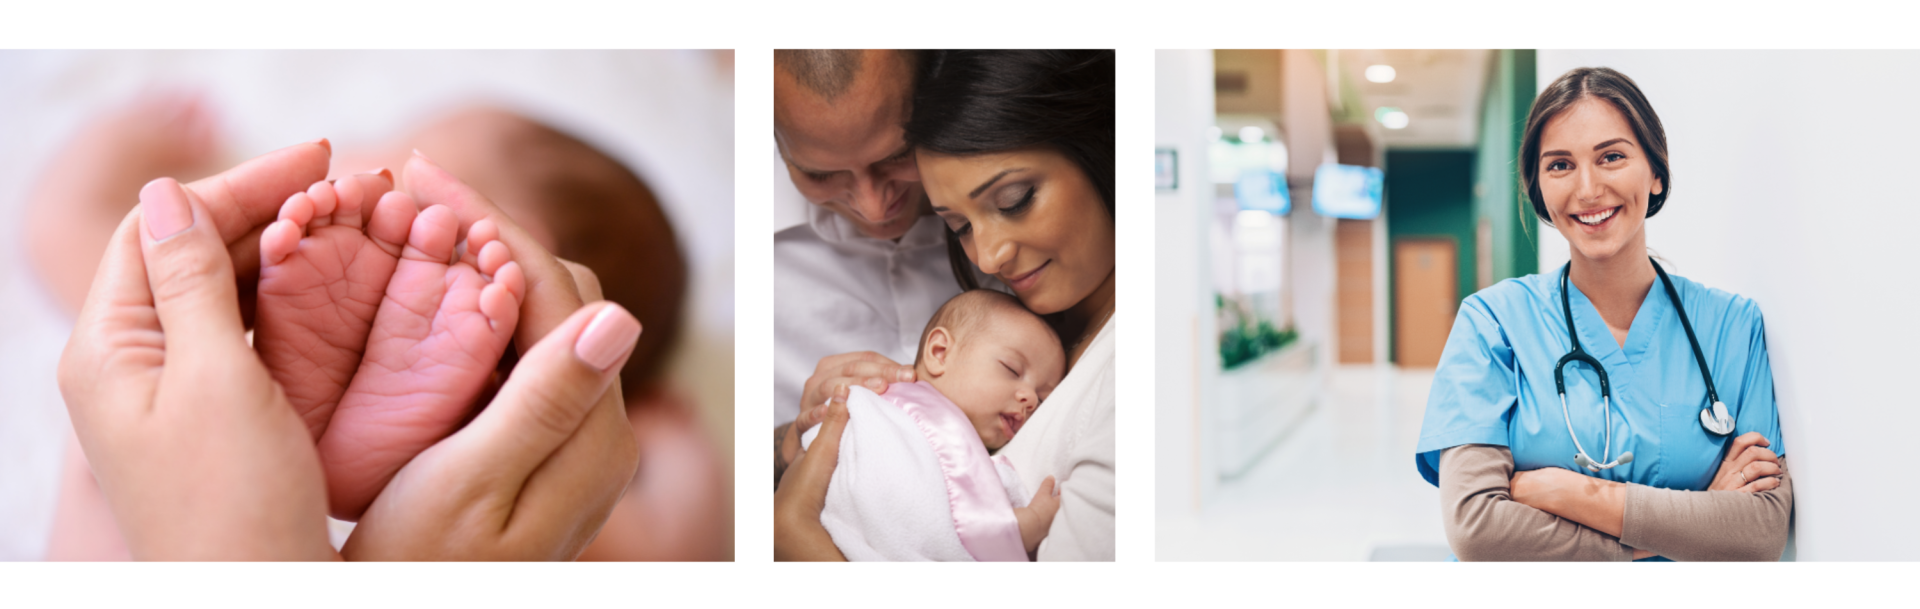 A triptych of tender moments and dedicated care: a close-up of a parent holding a baby's tiny feet, a family embracing in a nurturing cuddle with a newborn, and a smiling healthcare